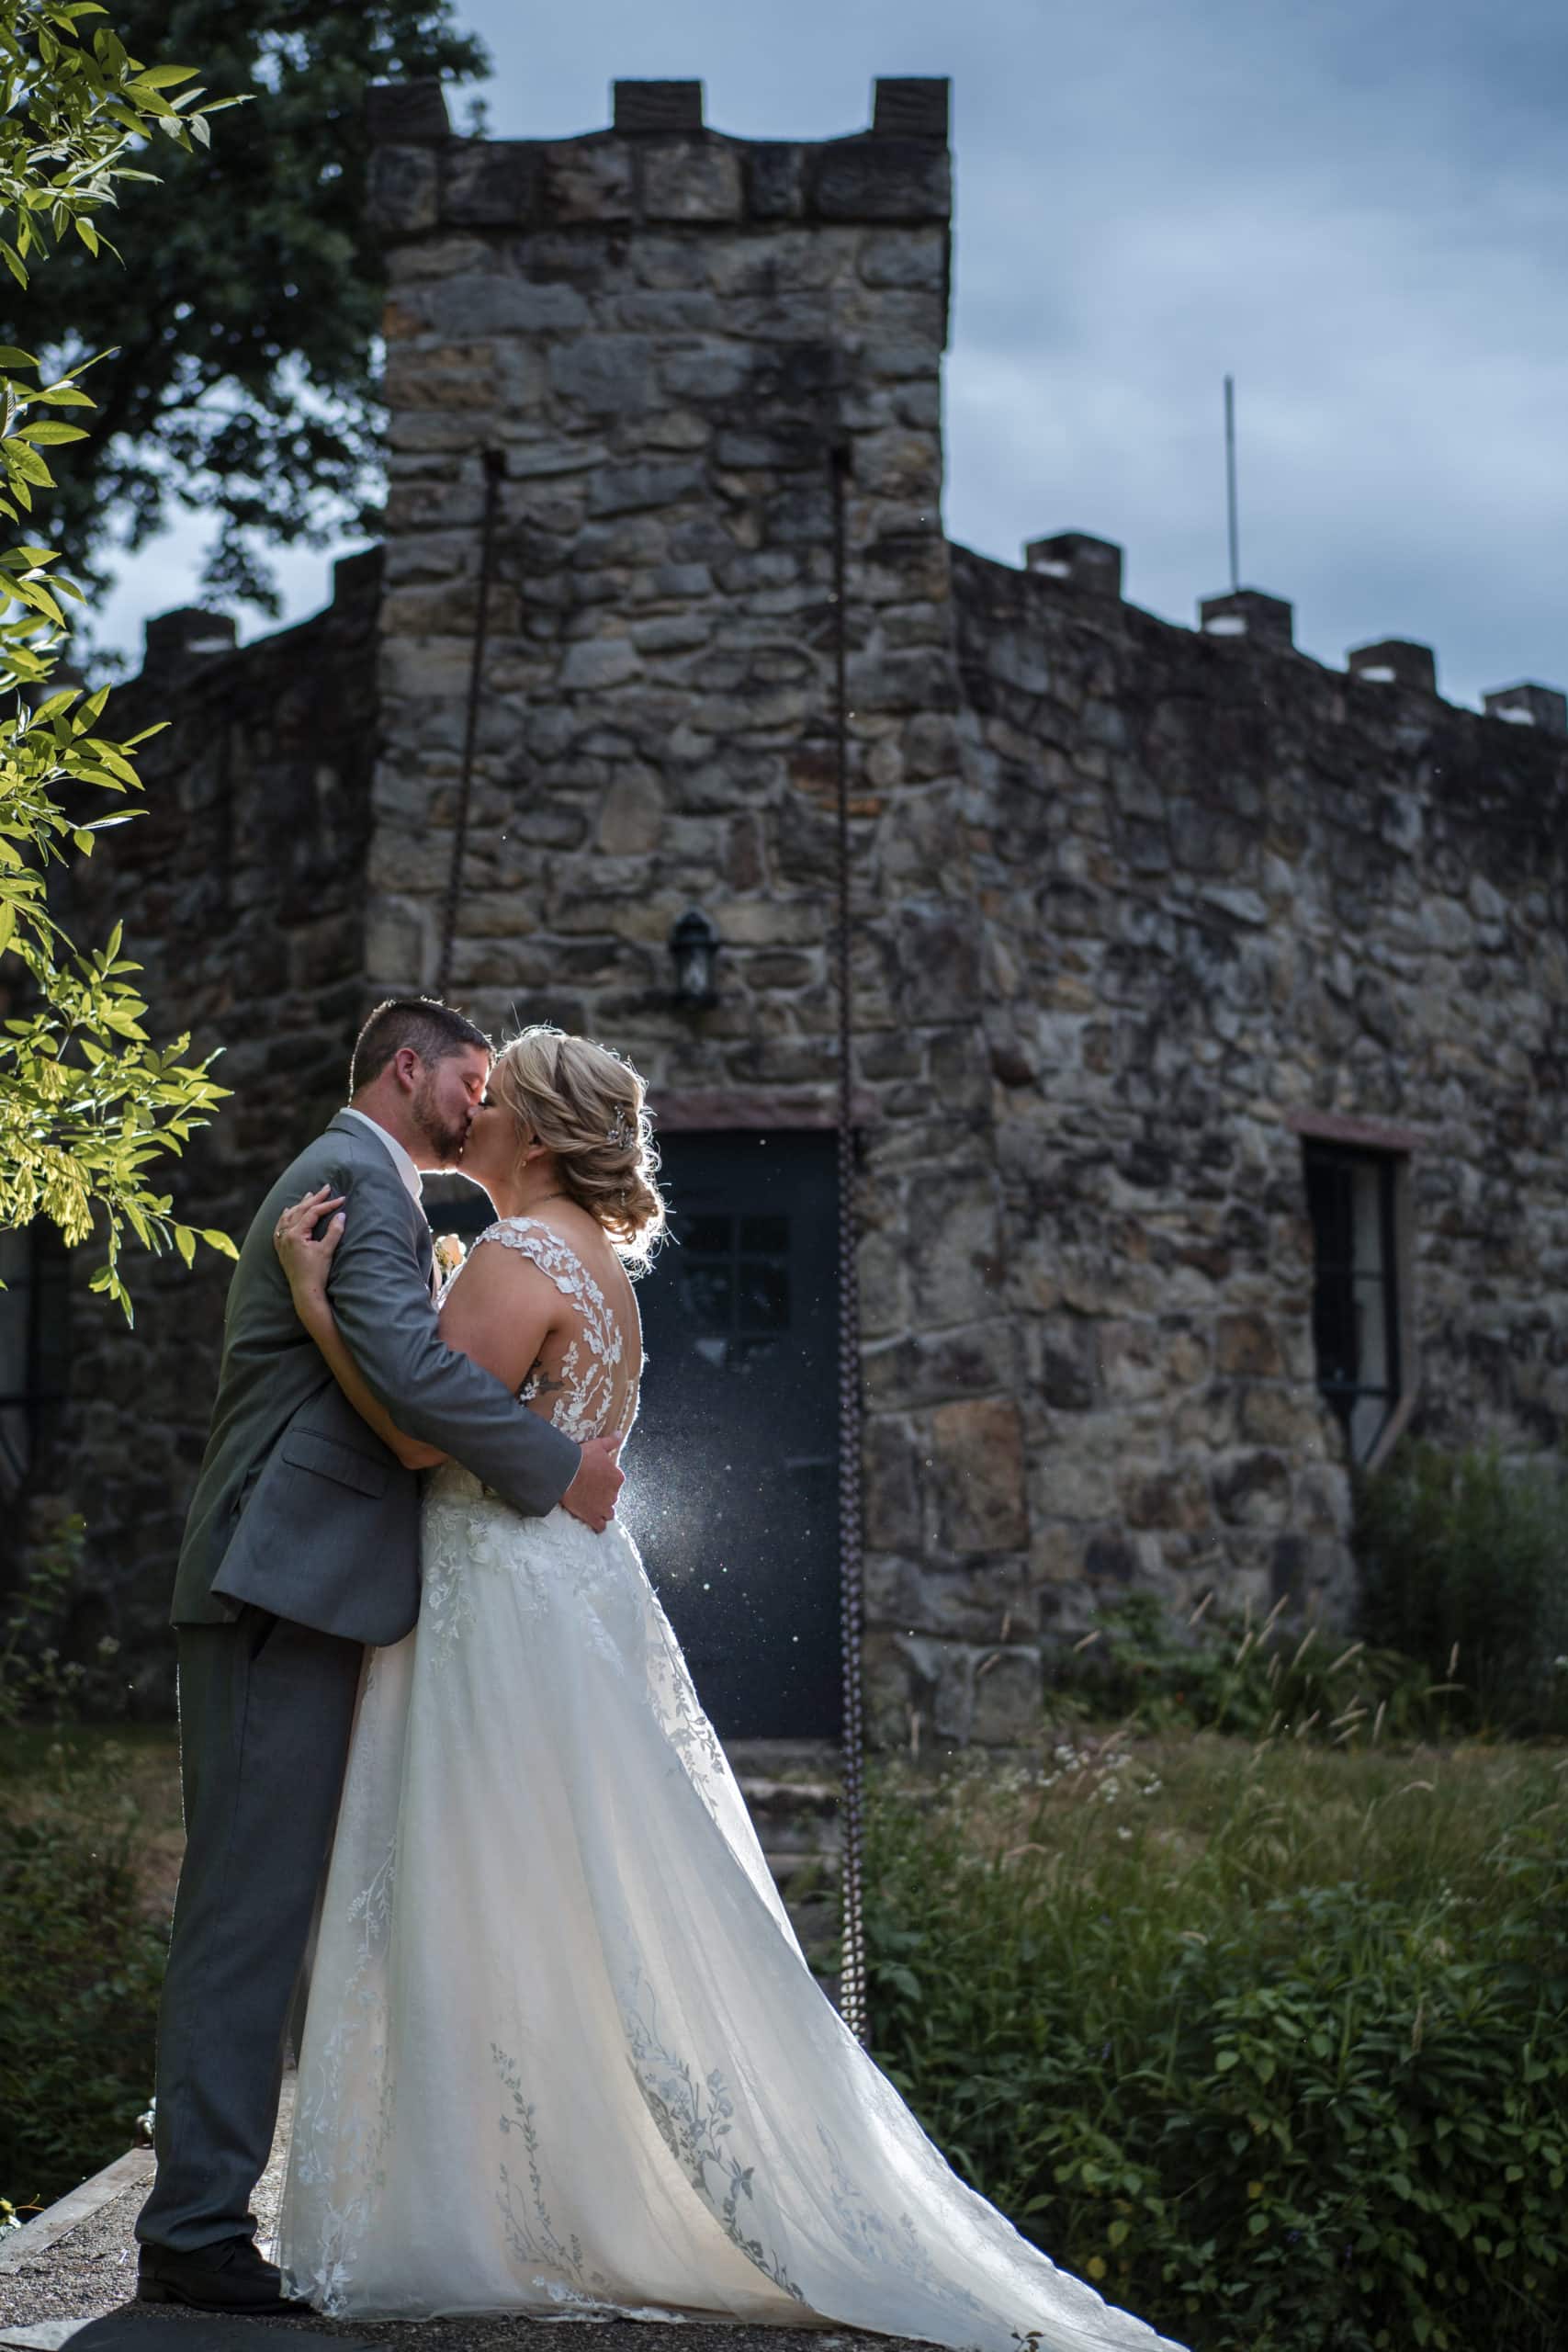 Bride and Groom kissing in front of a castle at Wilder Creek Nature center.